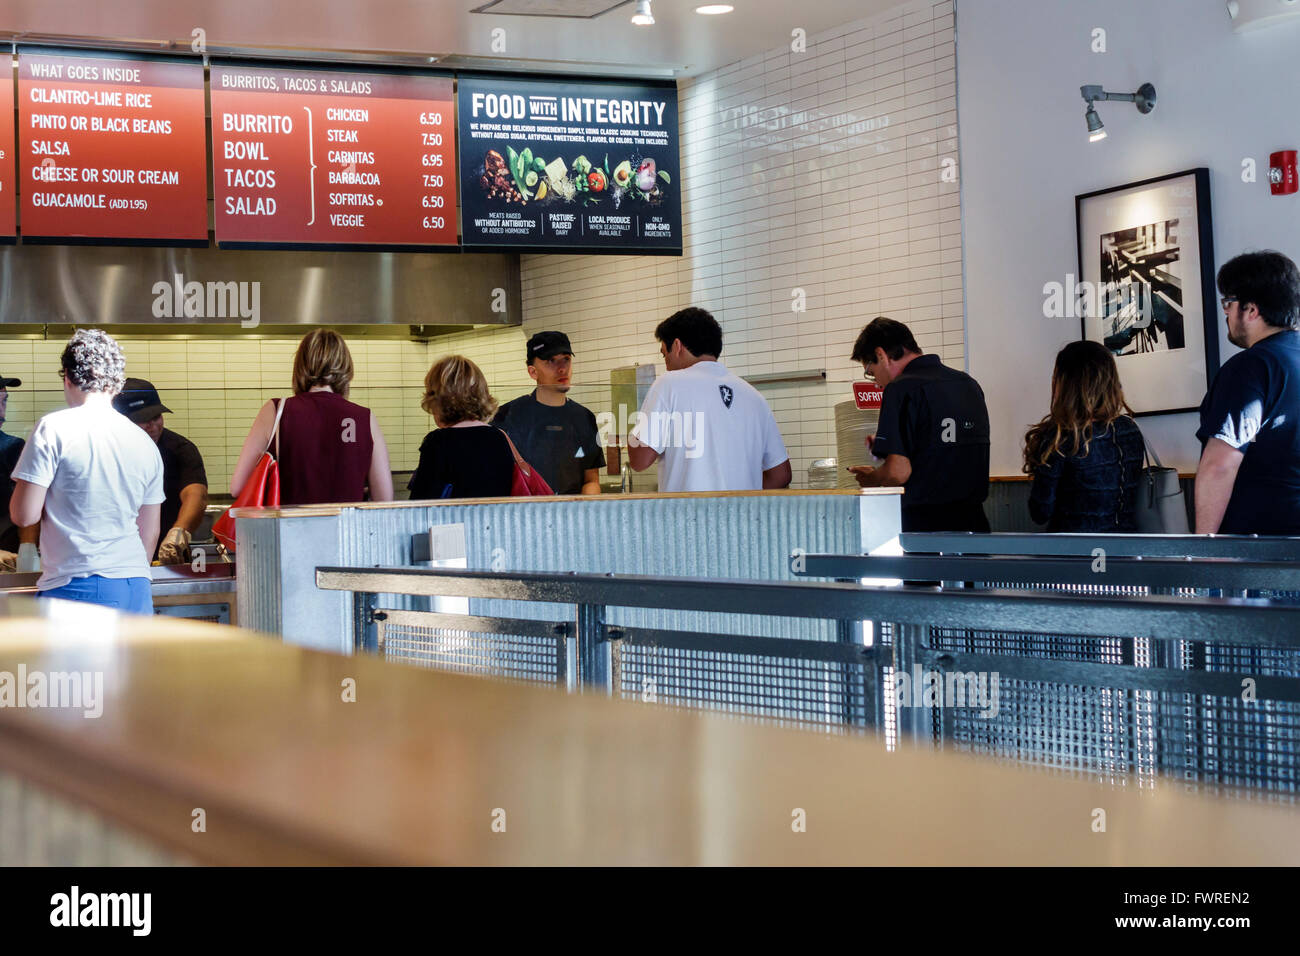 Miami Florida,Chipotle,restaurant restaurants food dining cafe cafes,Mexican,interior inside,order service line,queue,overhead menu,food with integrit Stock Photo